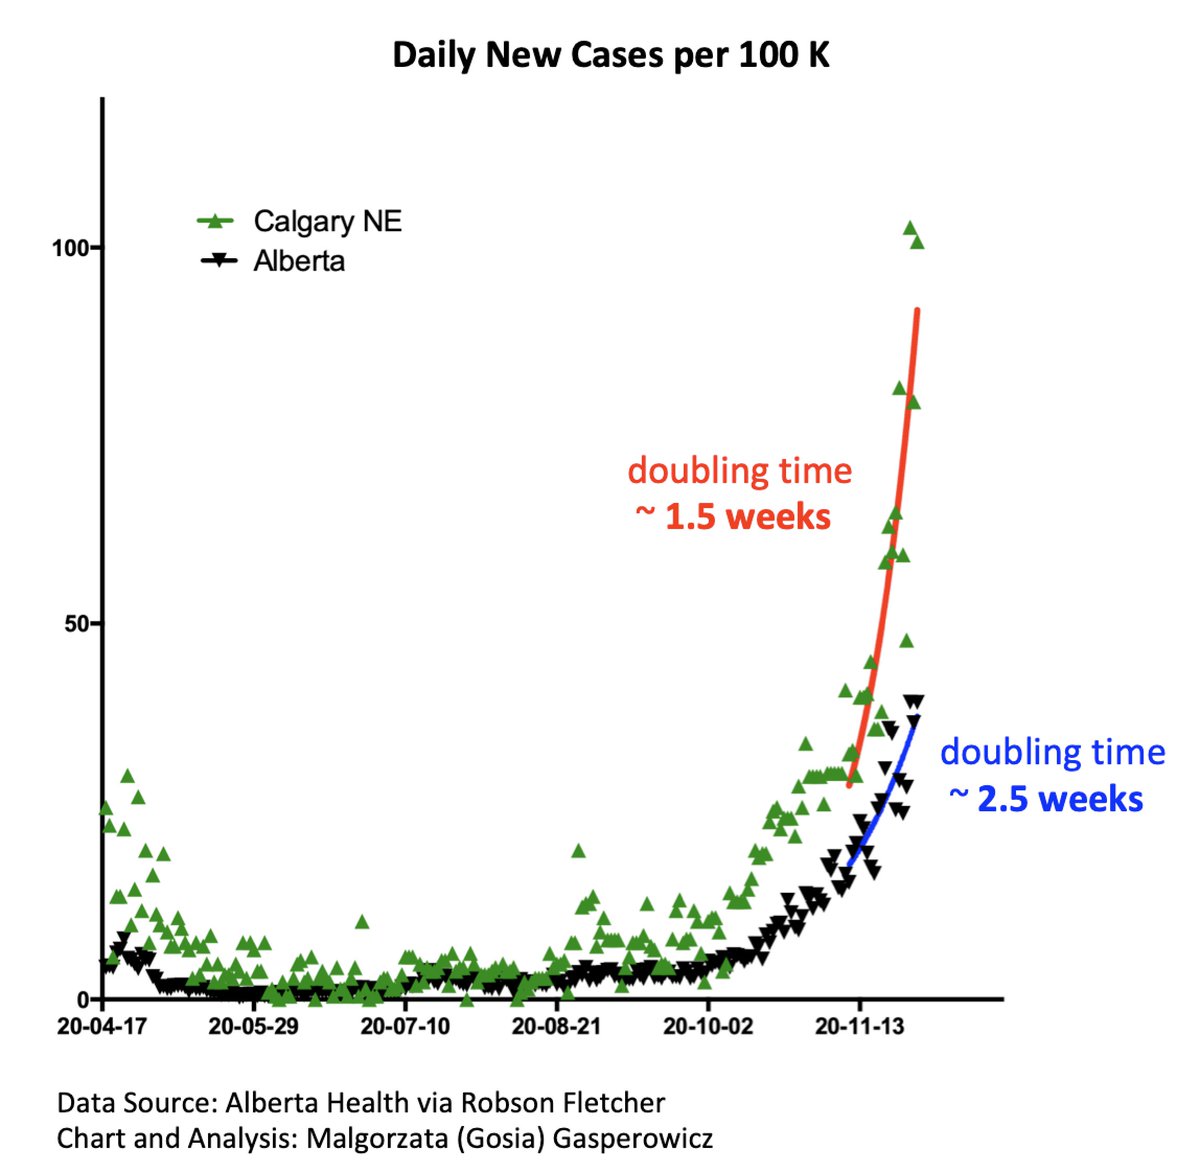 YYC NE has an extremely high new case rate (100/100 K, growing exponentially). It has a super fast doubling time of new daily cases: 1.5 weeks (AB 2.5 weeks).Everywhere in the world, frontline & essential workers are the primary victims of insufficient pandemic responses.1/